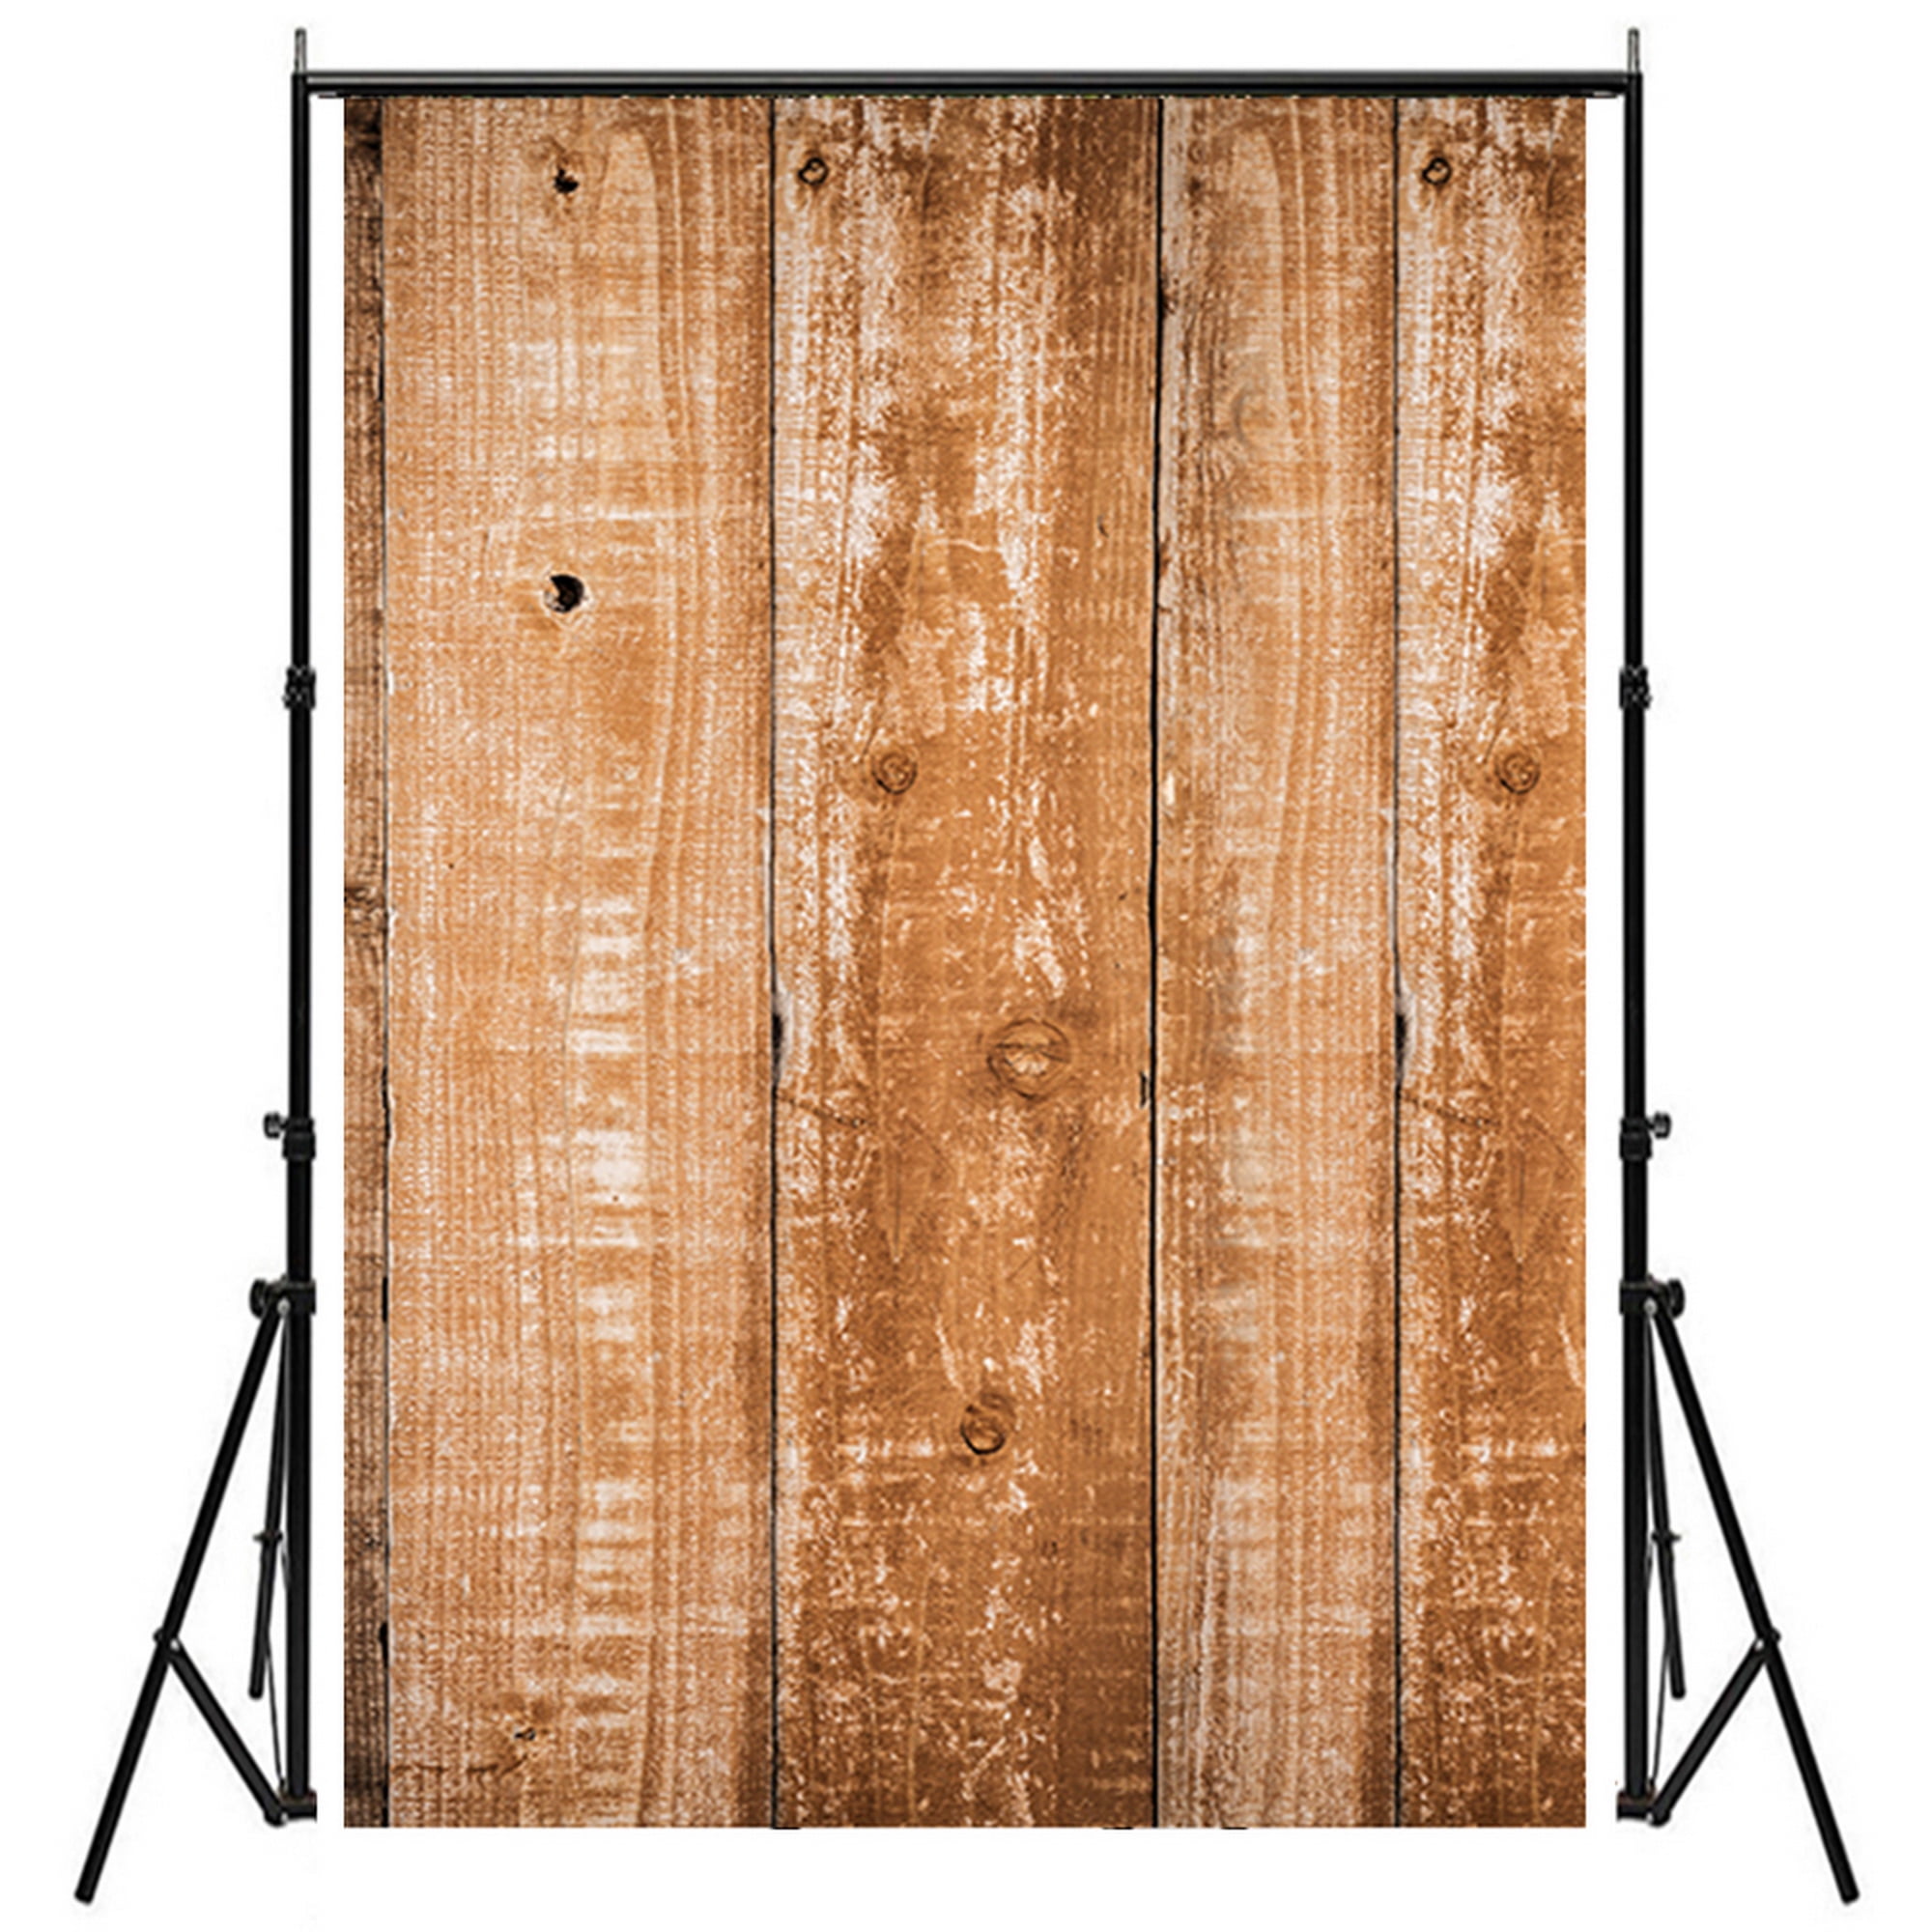 5 x 3 ft Rustic Wood Wall Photography Backdrop Light Brown Vintage Wooden Floor Board Photo Background for Baby Kids Graduation Party Decorations Studio Props 